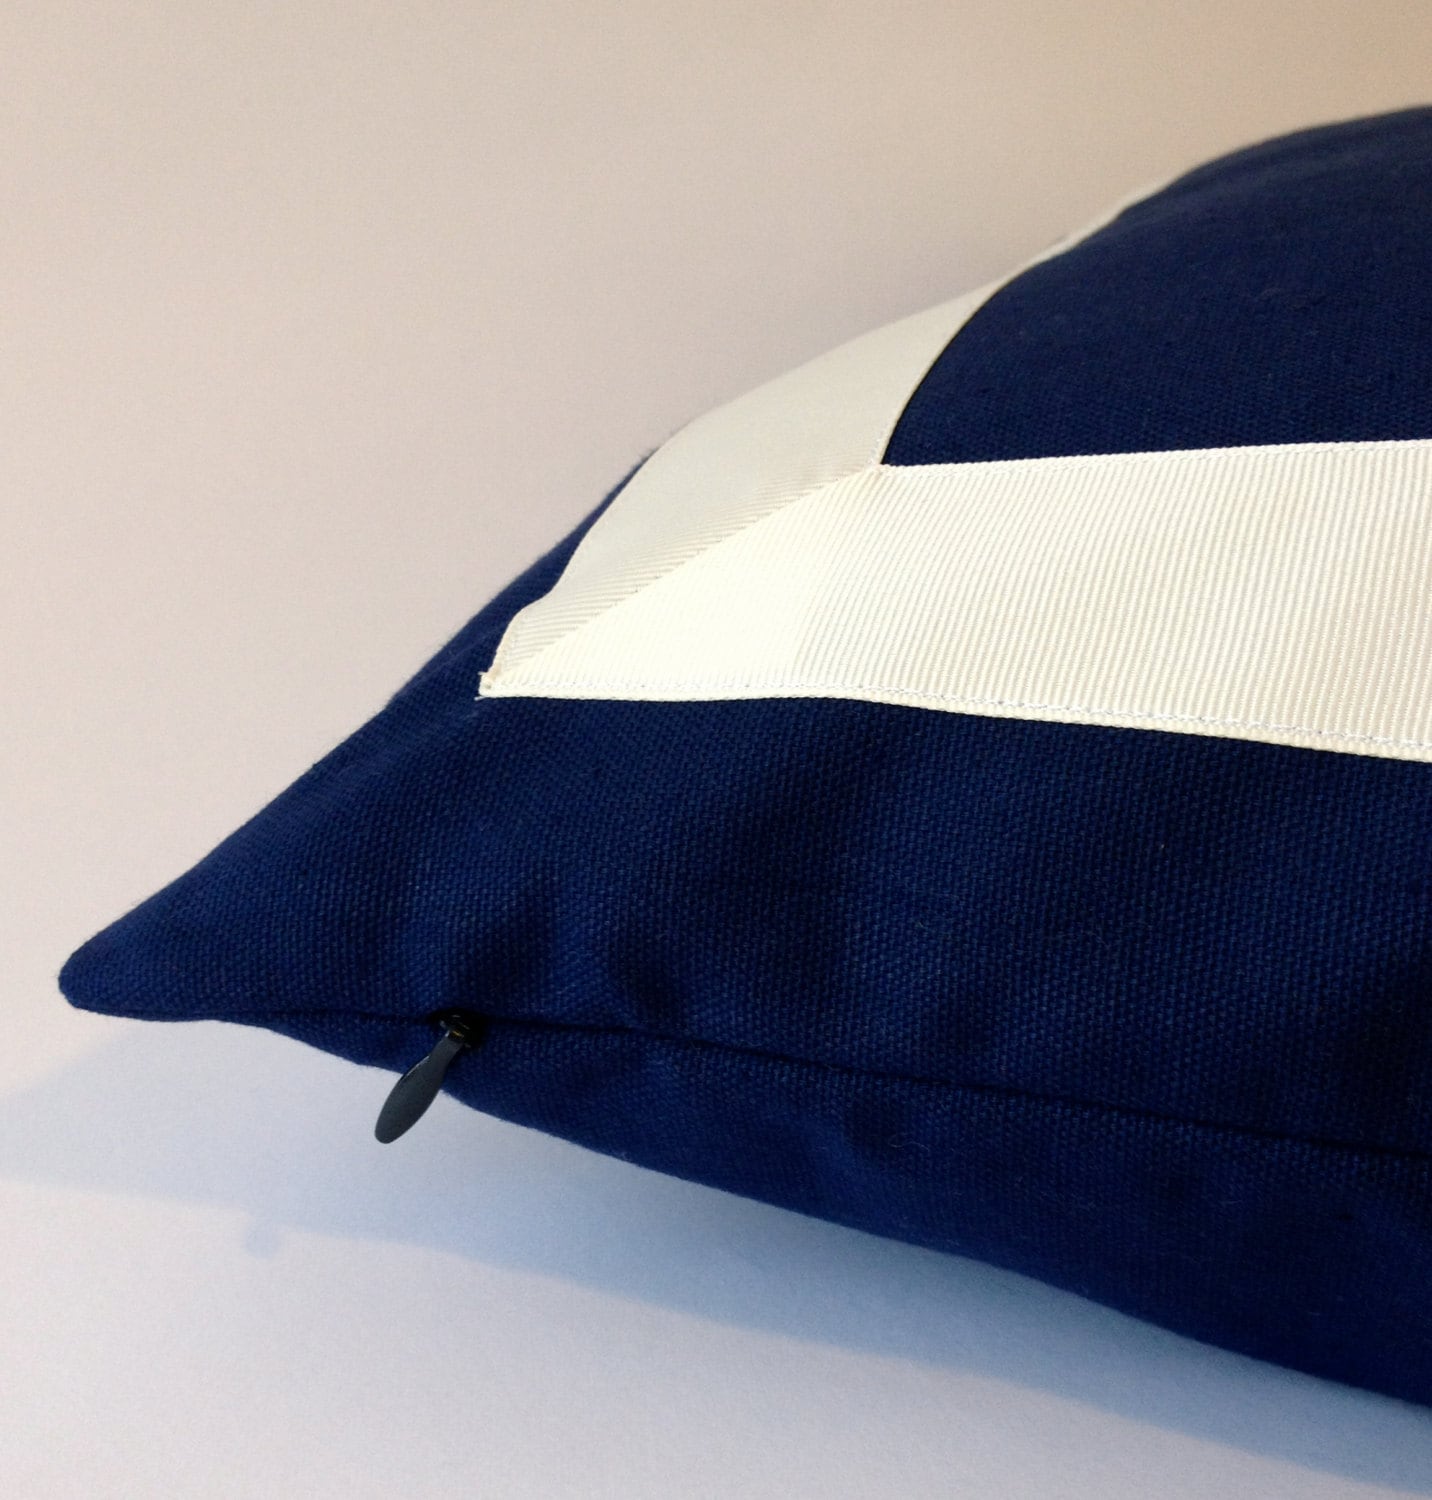 Navy Blue Cotton Canvas Pillow Cover with Off white Grosgrain Ribbon Decorative Throw Pillow Cover Cushion Cover 41x41 cm